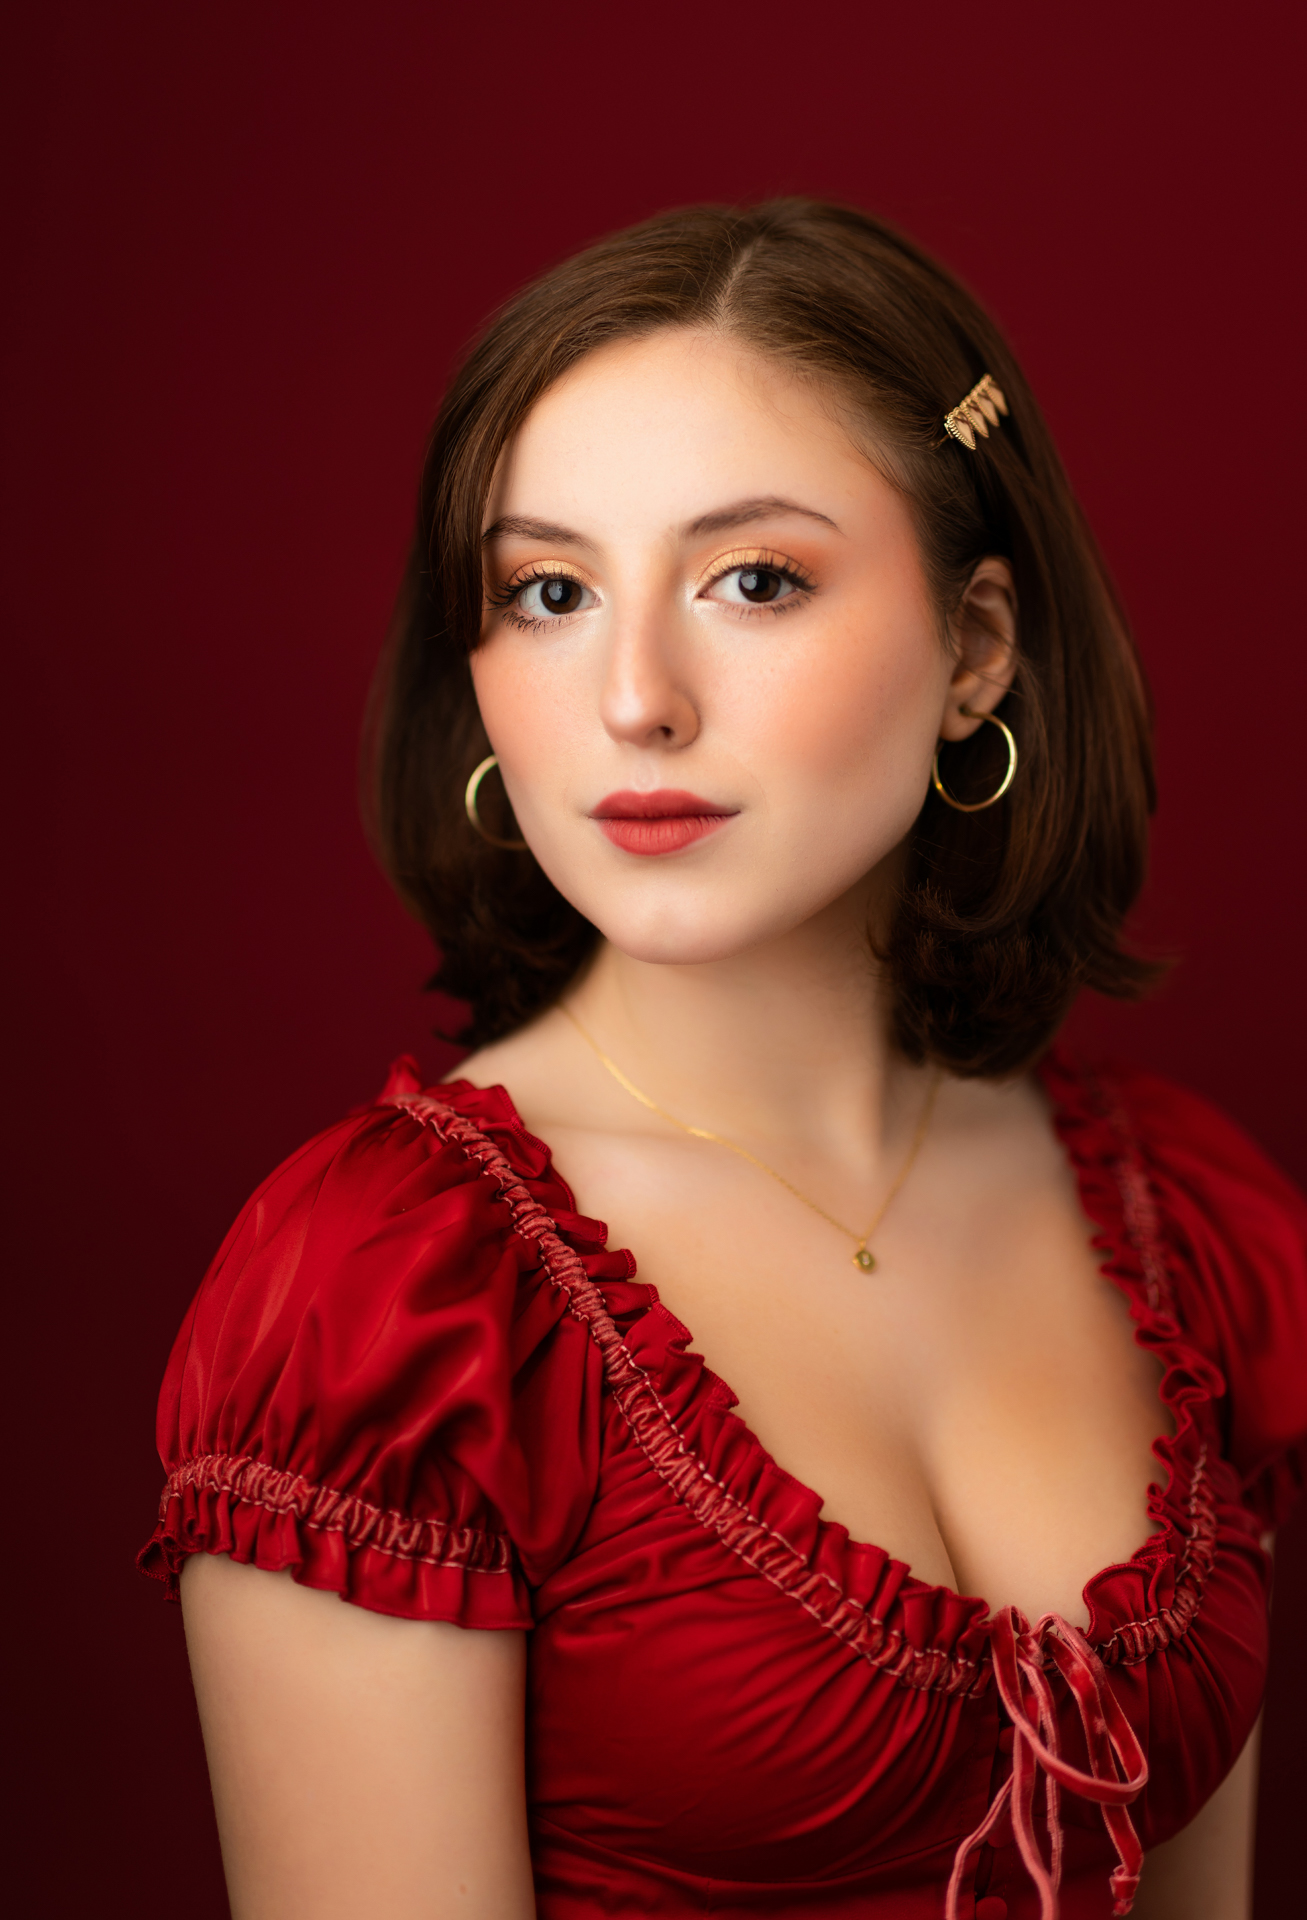 Professional musician portrait of young woman wearing red shirt on red background